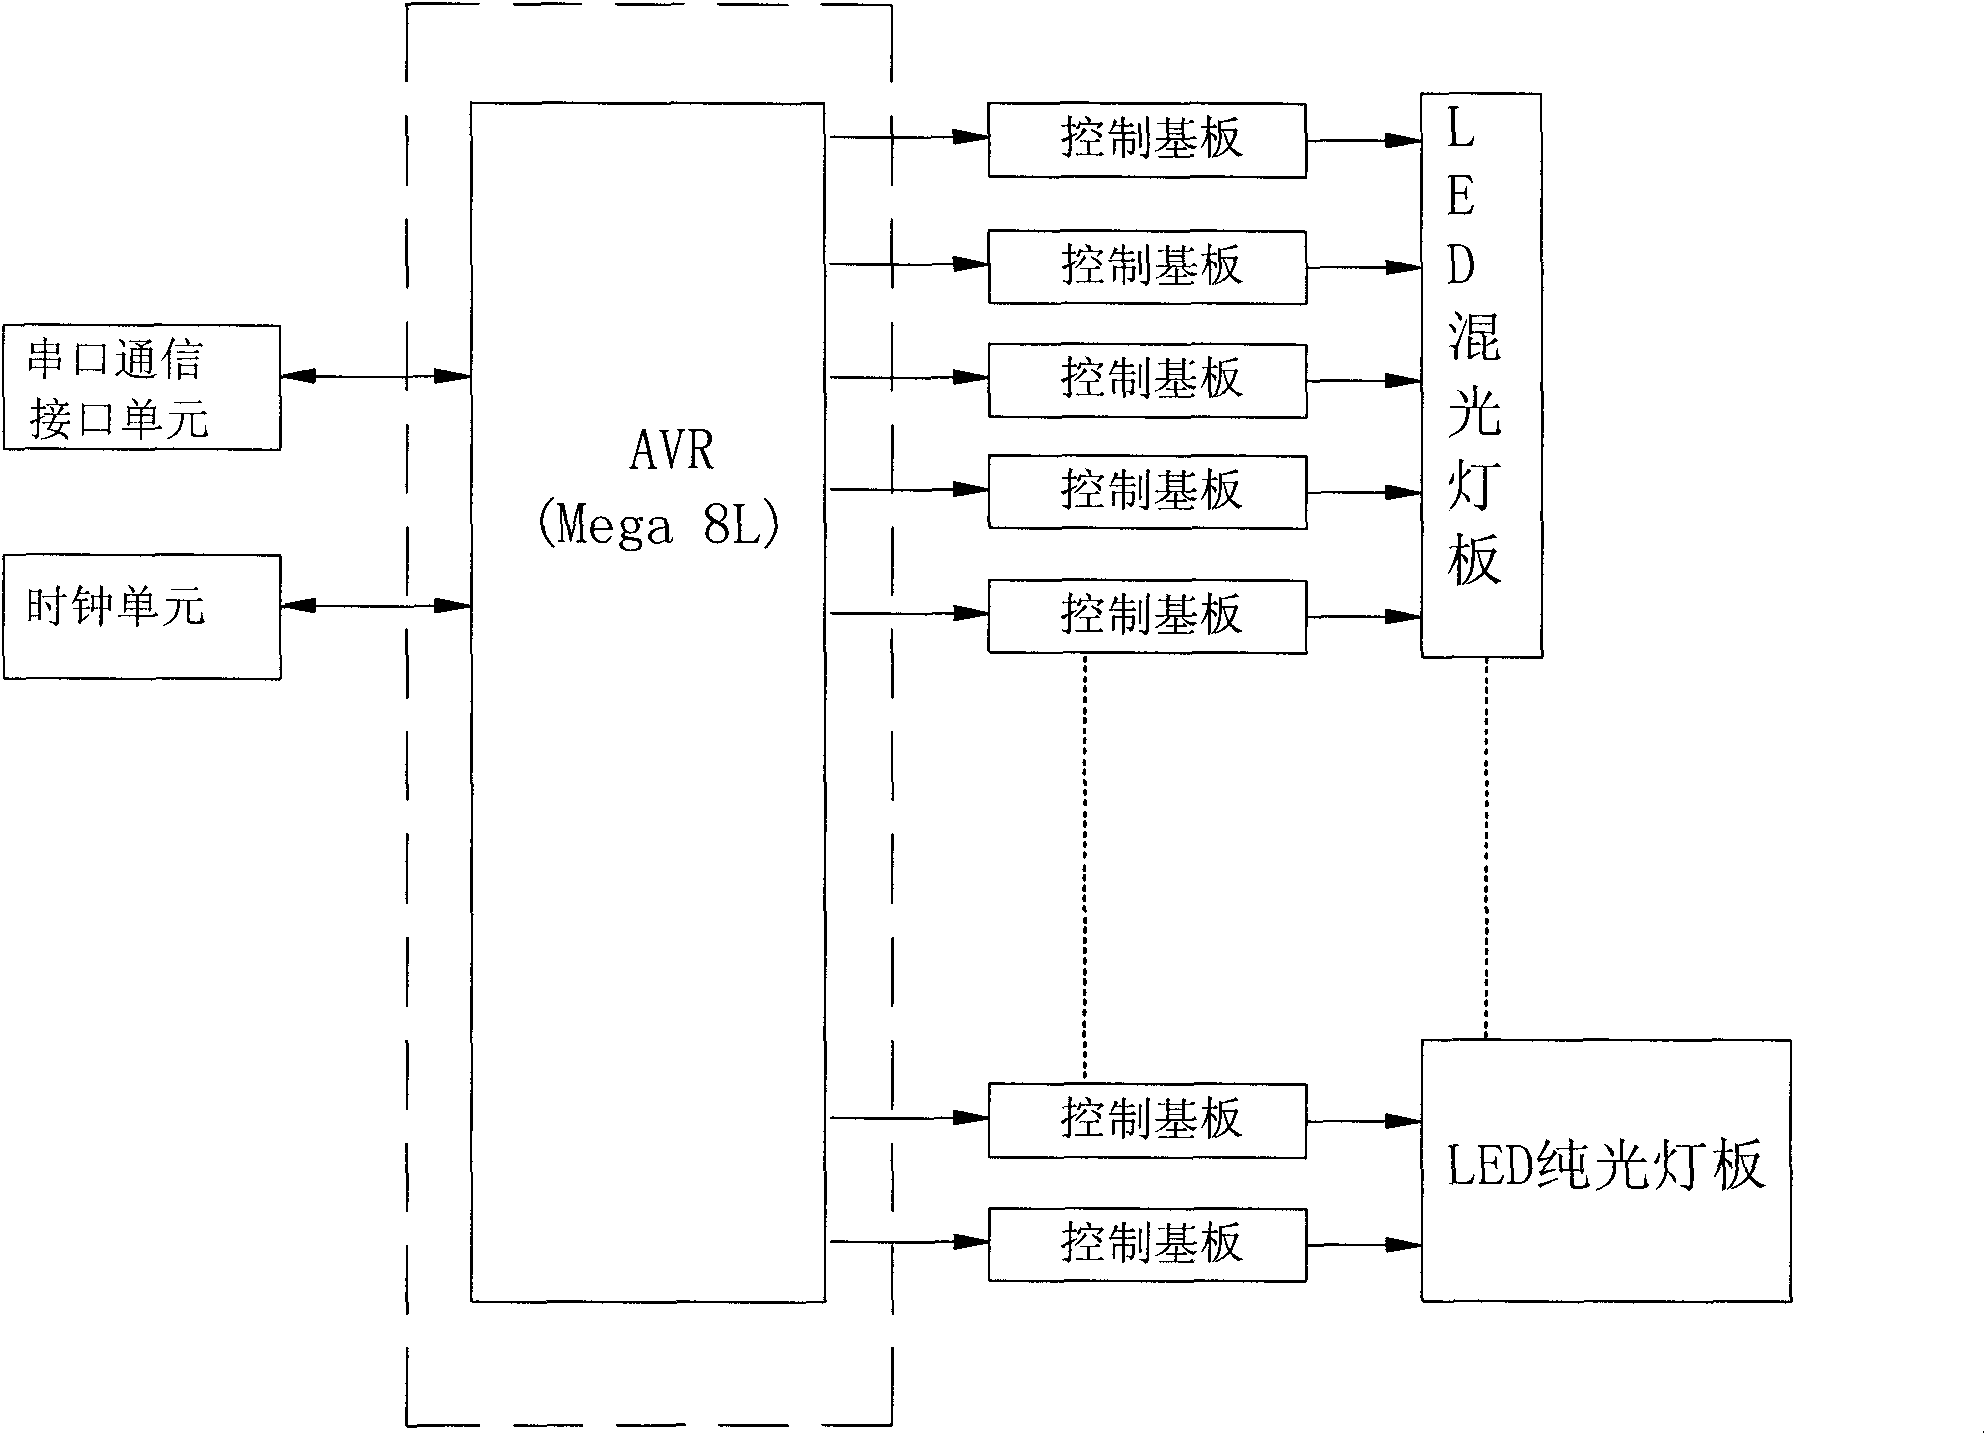 LED light source control system for growth of configuration plants